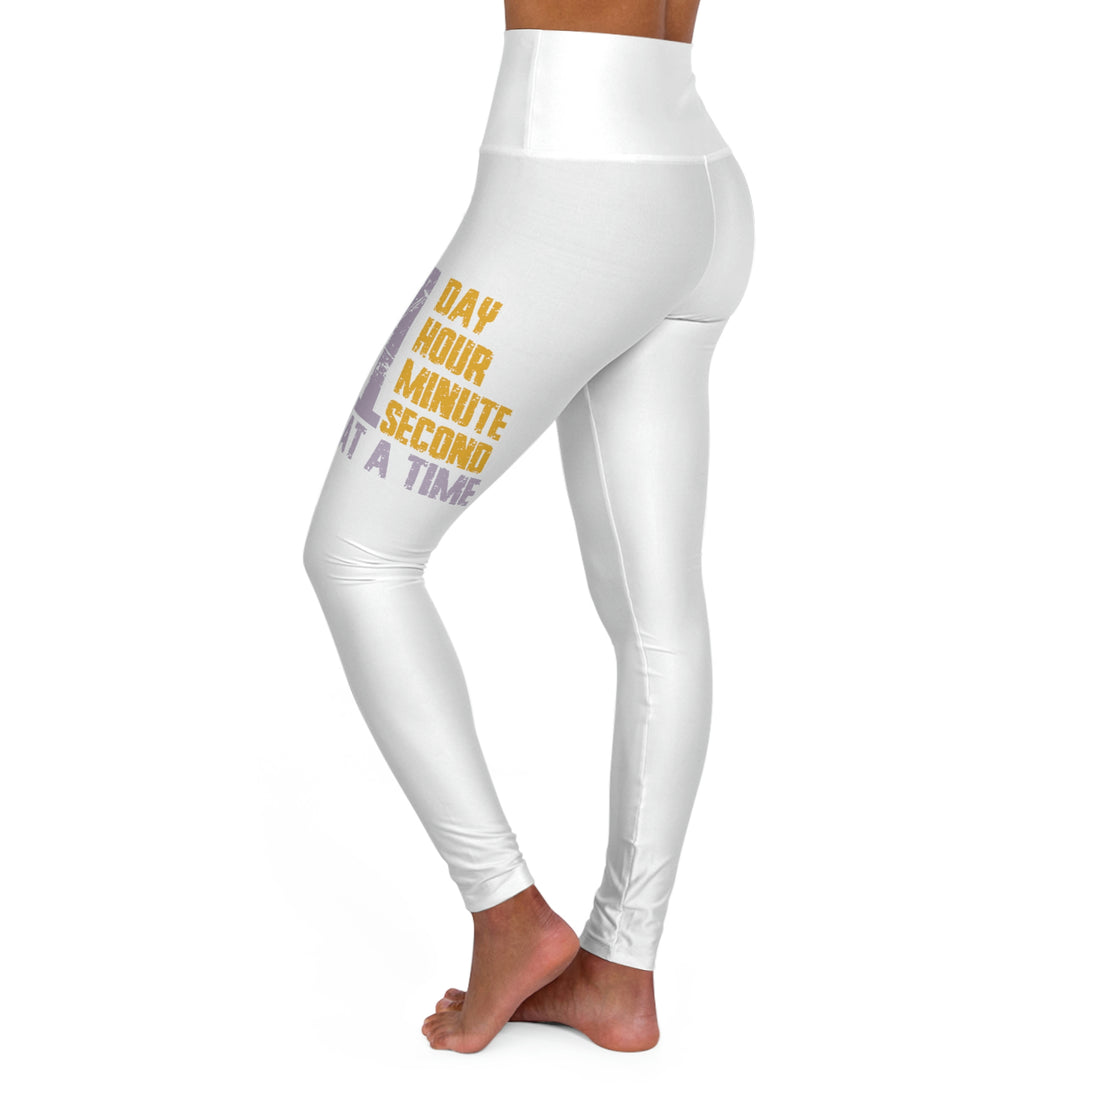 1 Day Hour Minute Second At A Time - White High Waisted Yoga Leggings